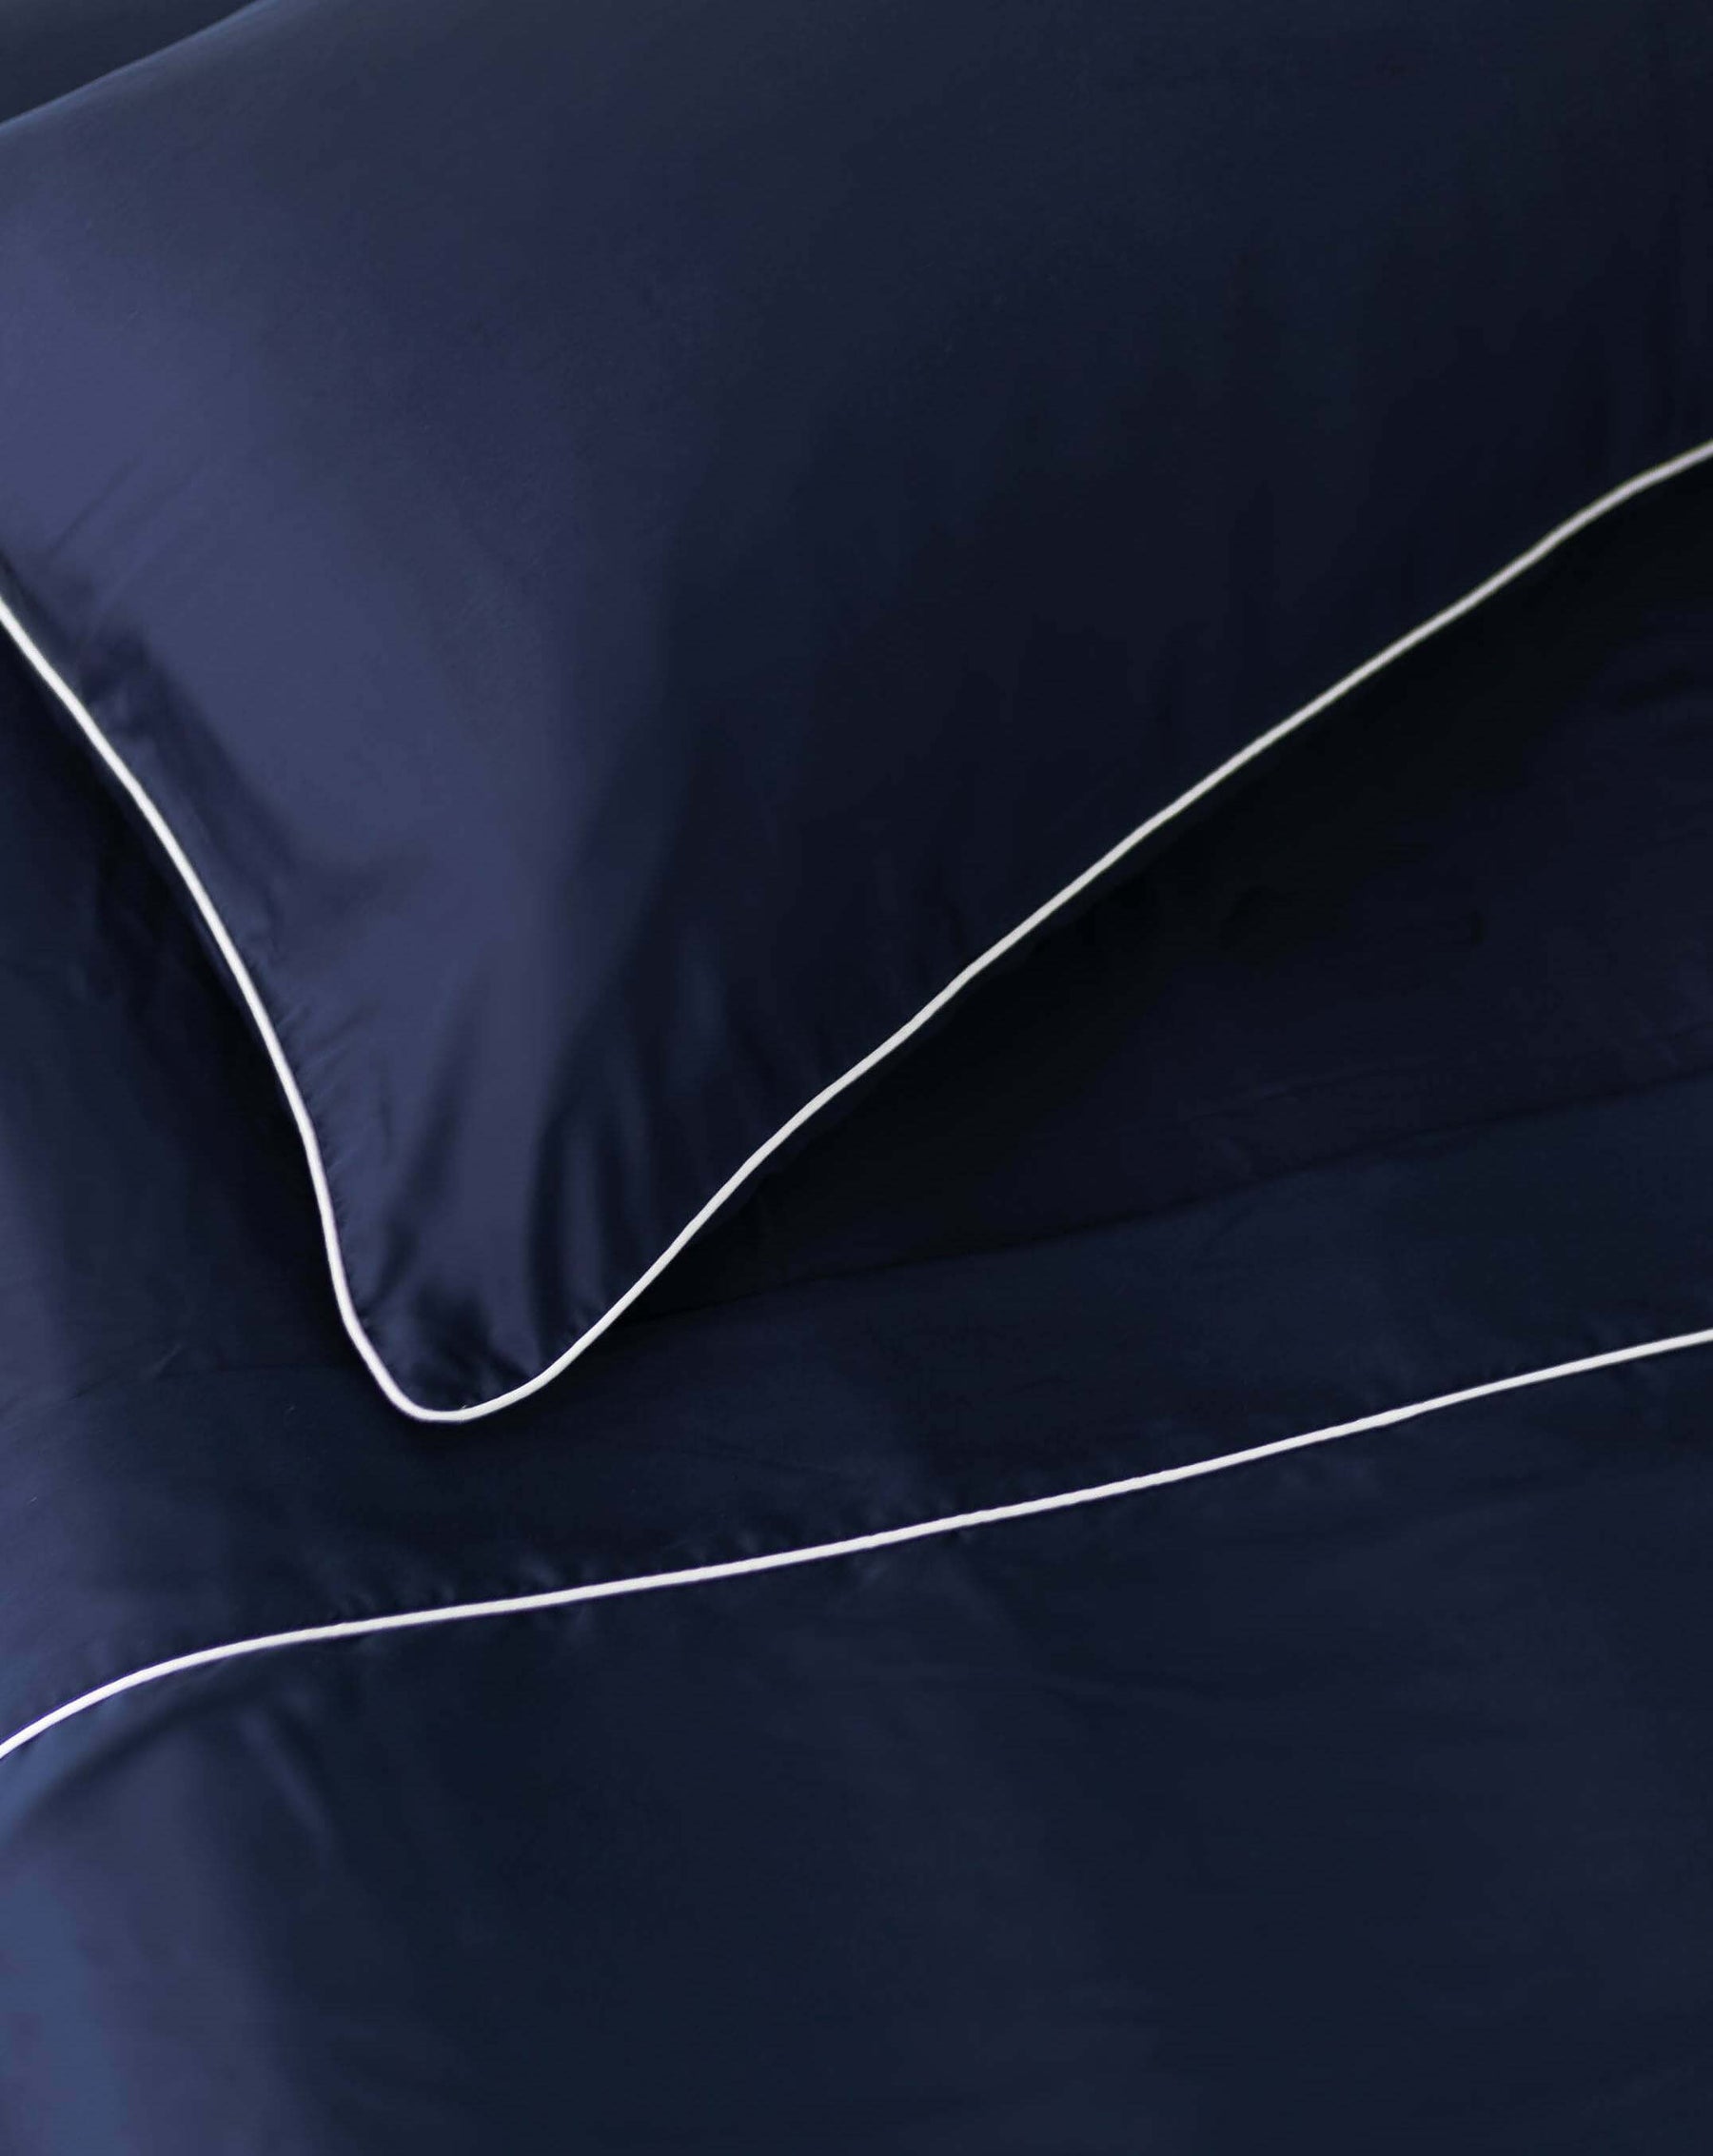 ava and ava ph organic bamboo lyocell 4pc sheet set (fitted sheet, flat sheet, pillowcases) navy blue with white contrast piping at the top hem